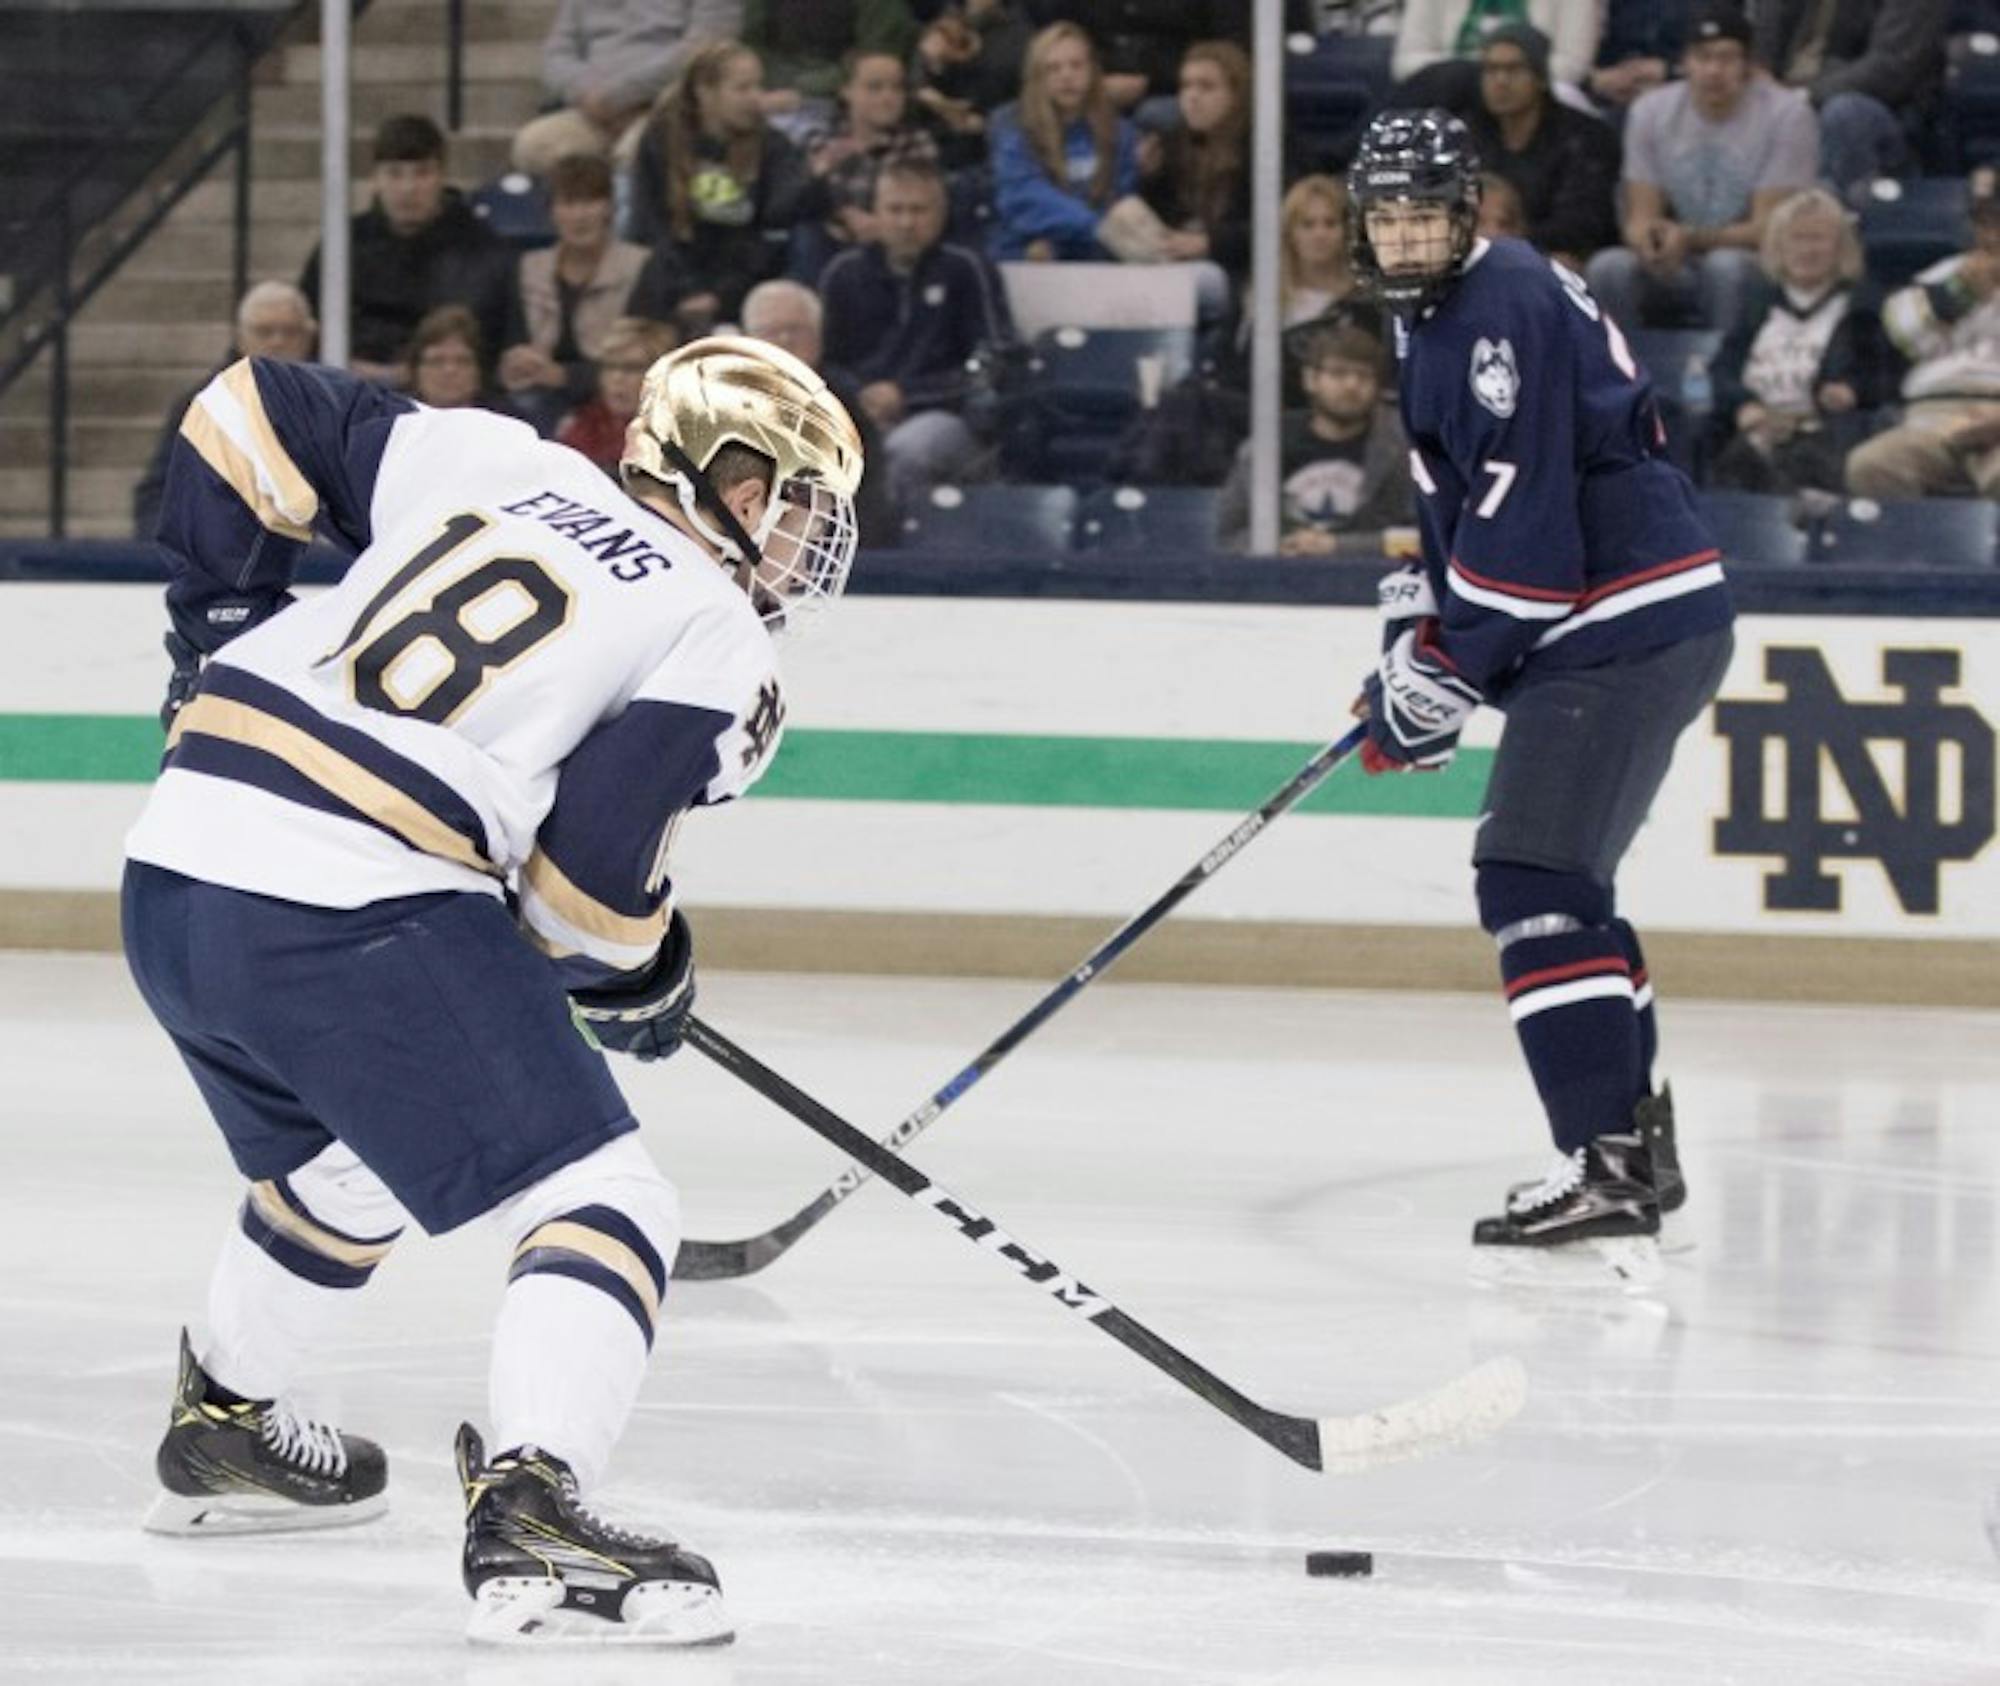 Irish junior forward Jake Evans looks to move the puck during Notre Dame’s 4-2 loss against UConn on Oct. 27 at Compton Family Ice Arena.